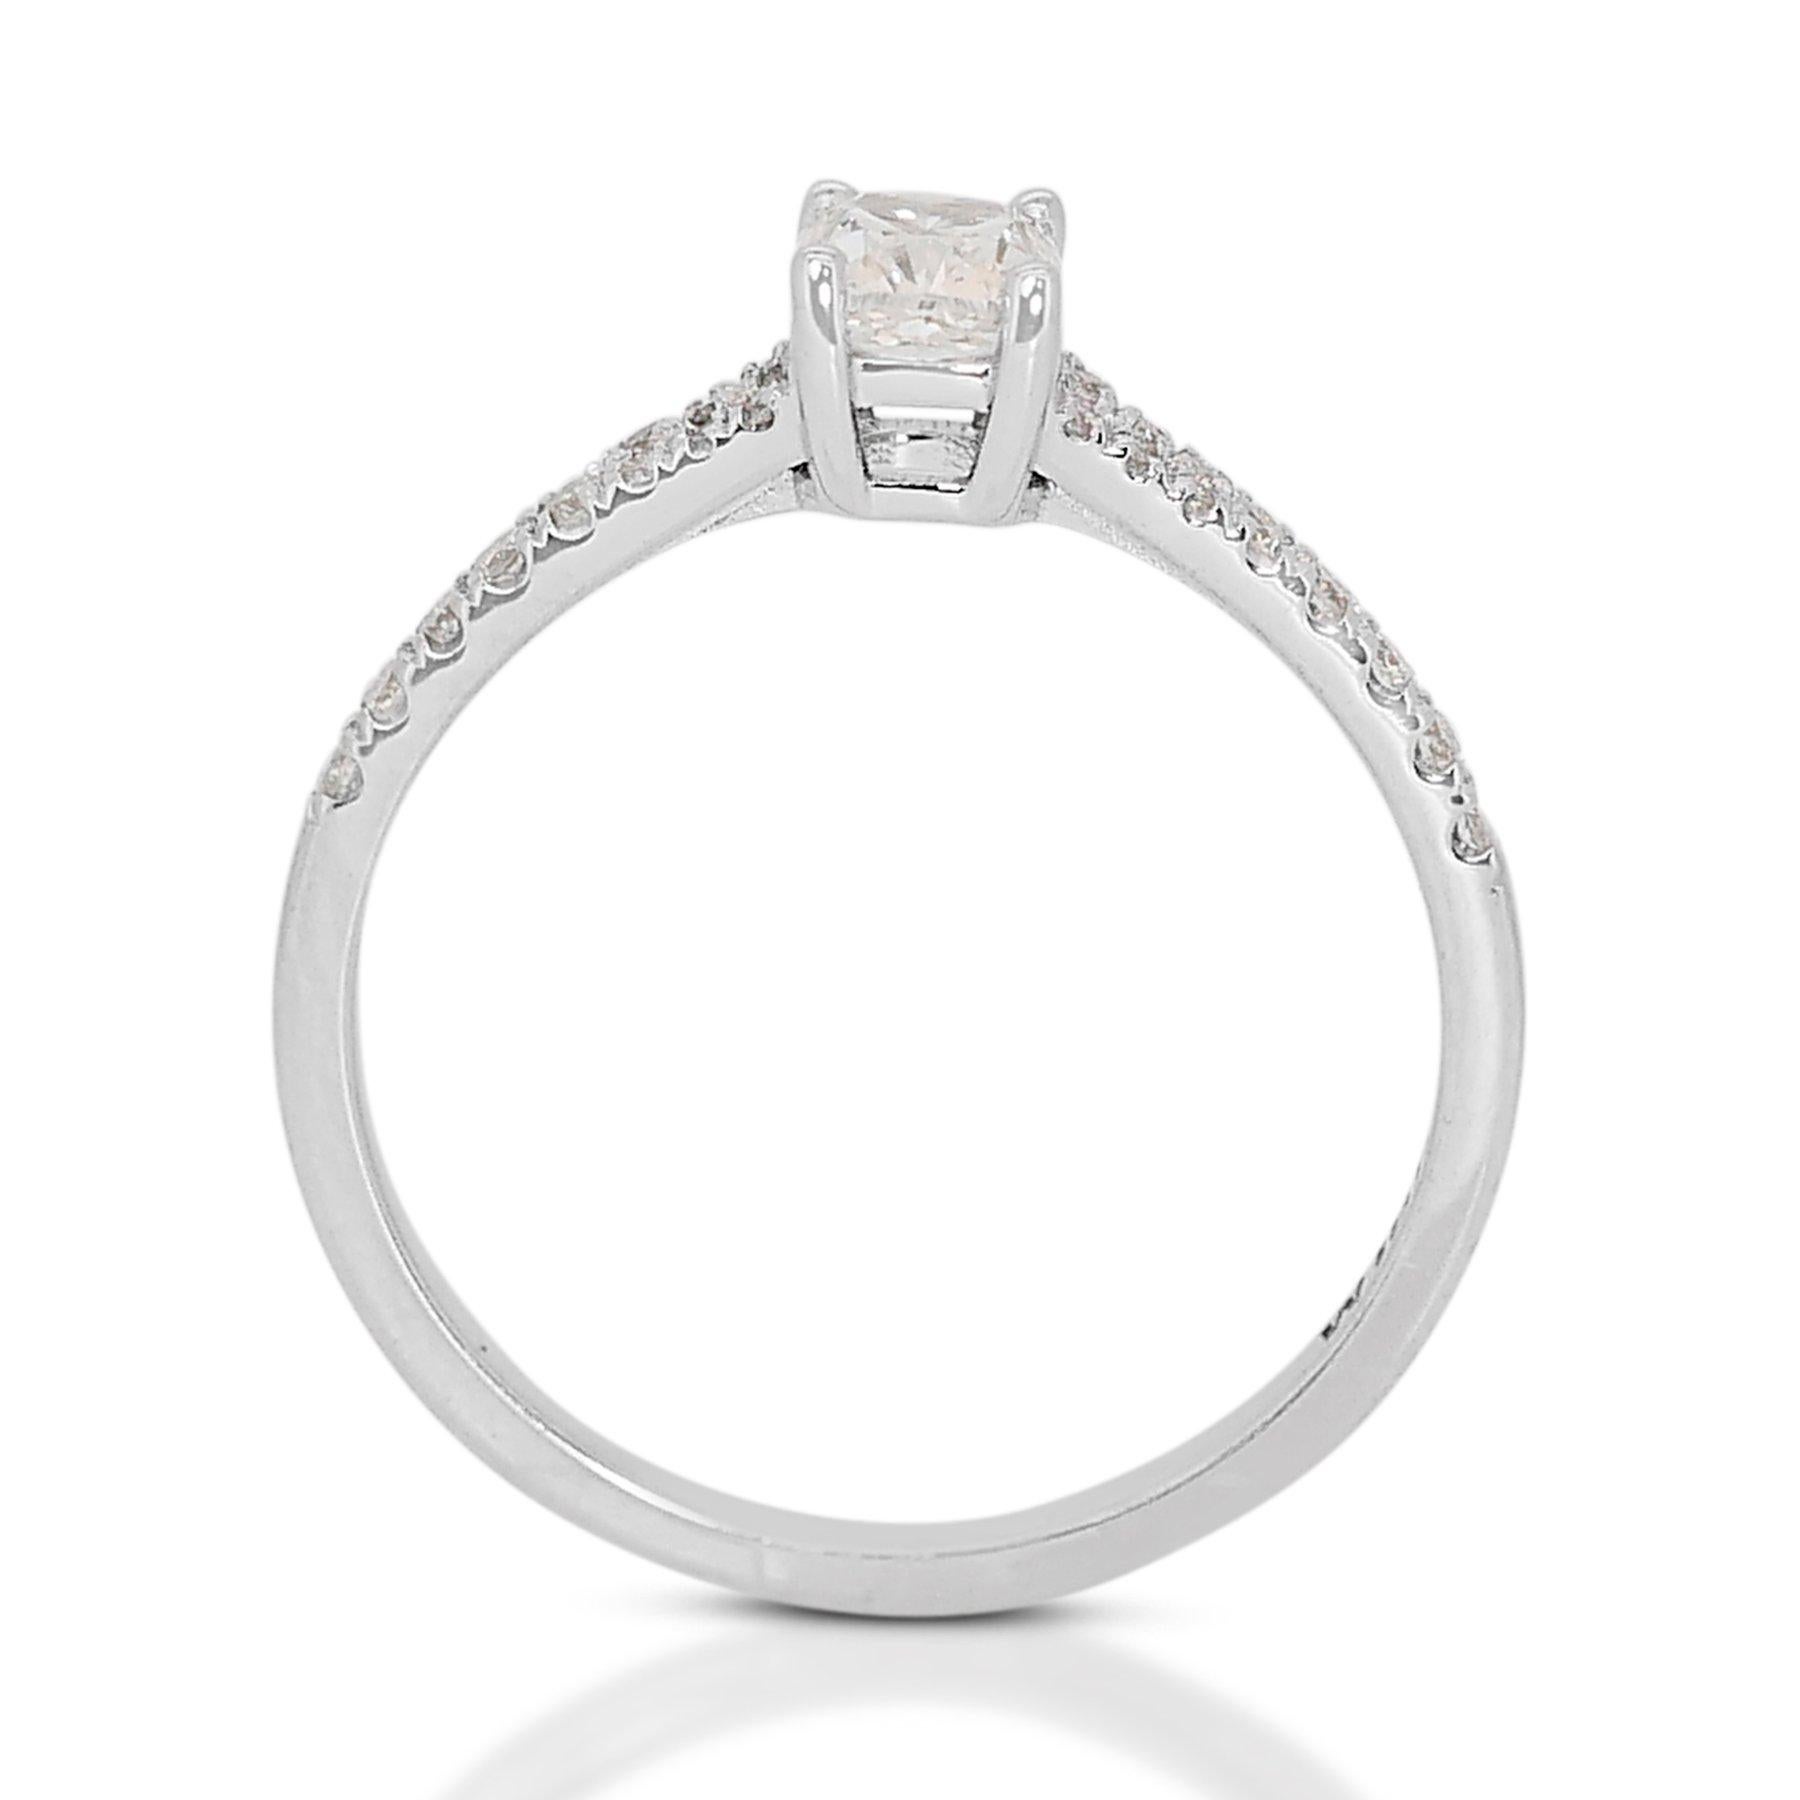 Mesmerizing 1.17ct Diamond Pave Ring in 18k White Gold - GIA Certified For Sale 2